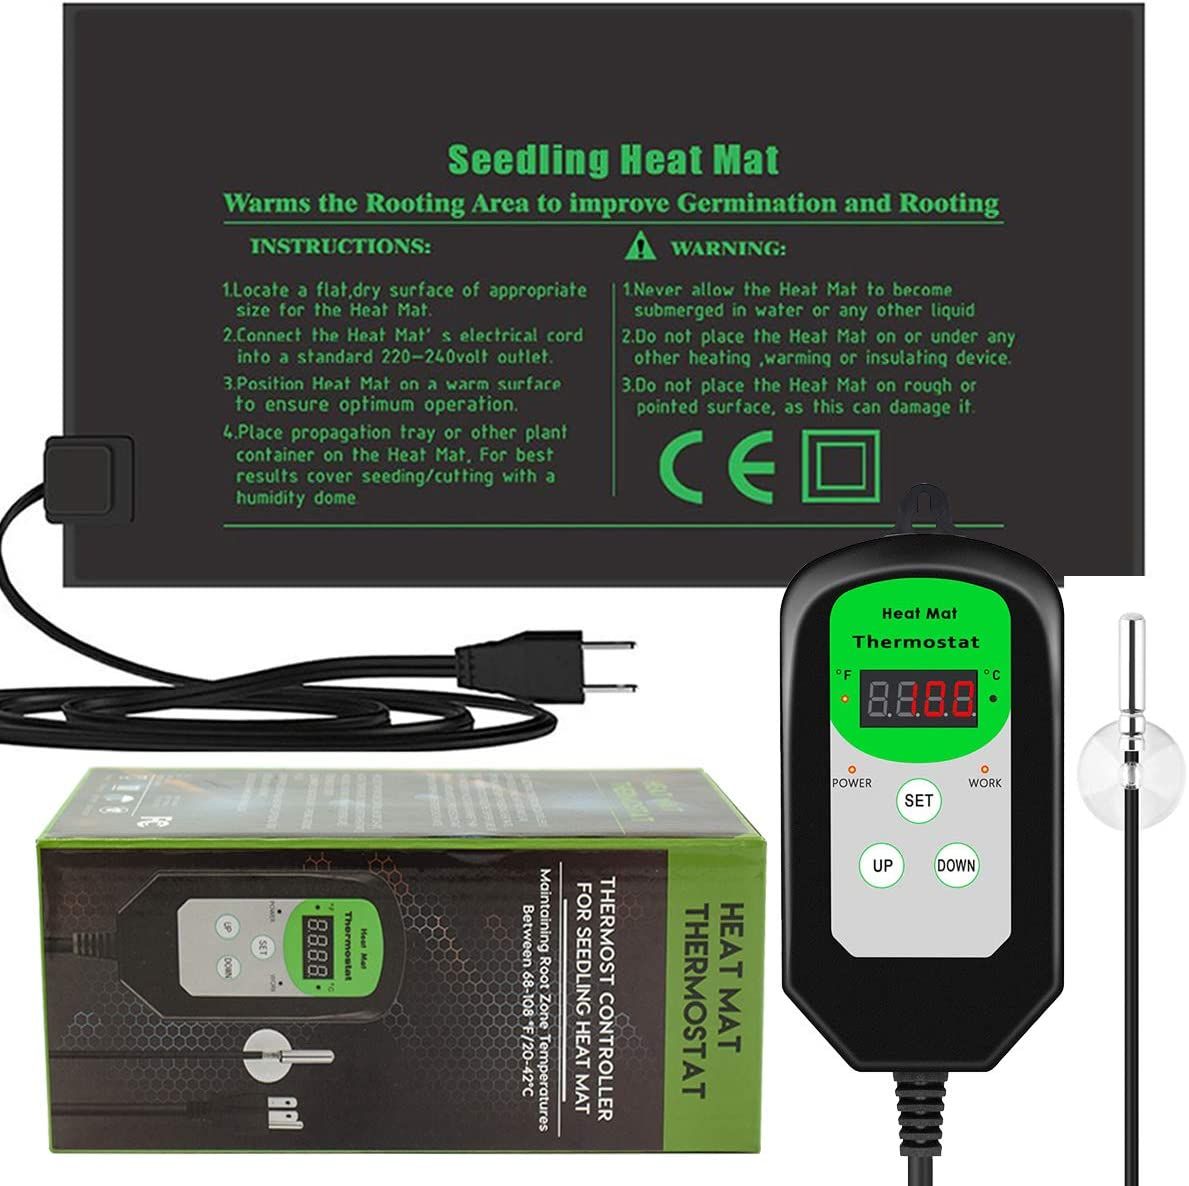 RIOGOO Seedling Heat Mat and Thermostat Controller - $$title$$